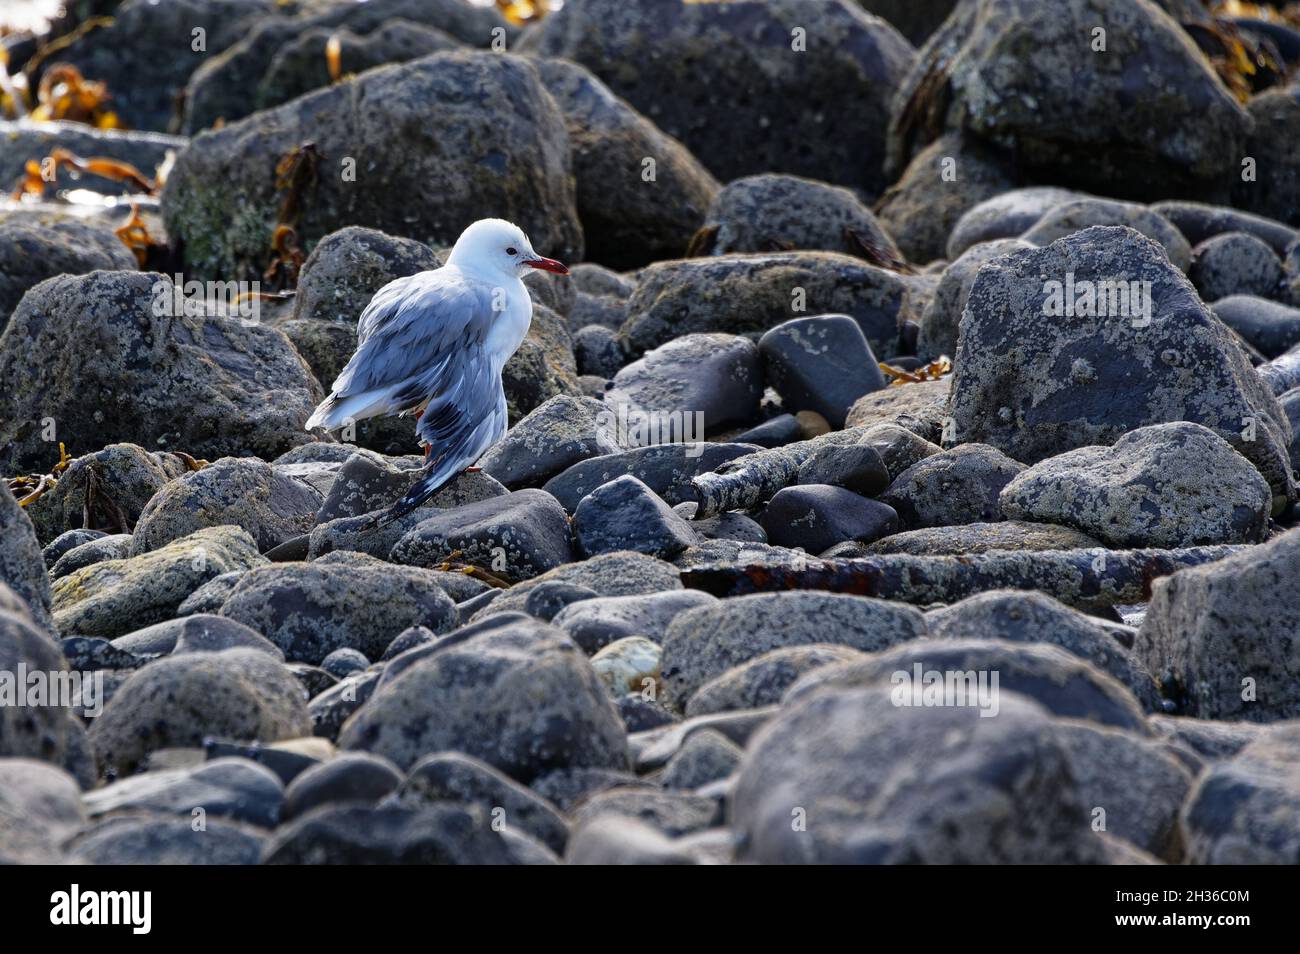 A seagull has hurt its wing, it is not looking well. Stock Photo